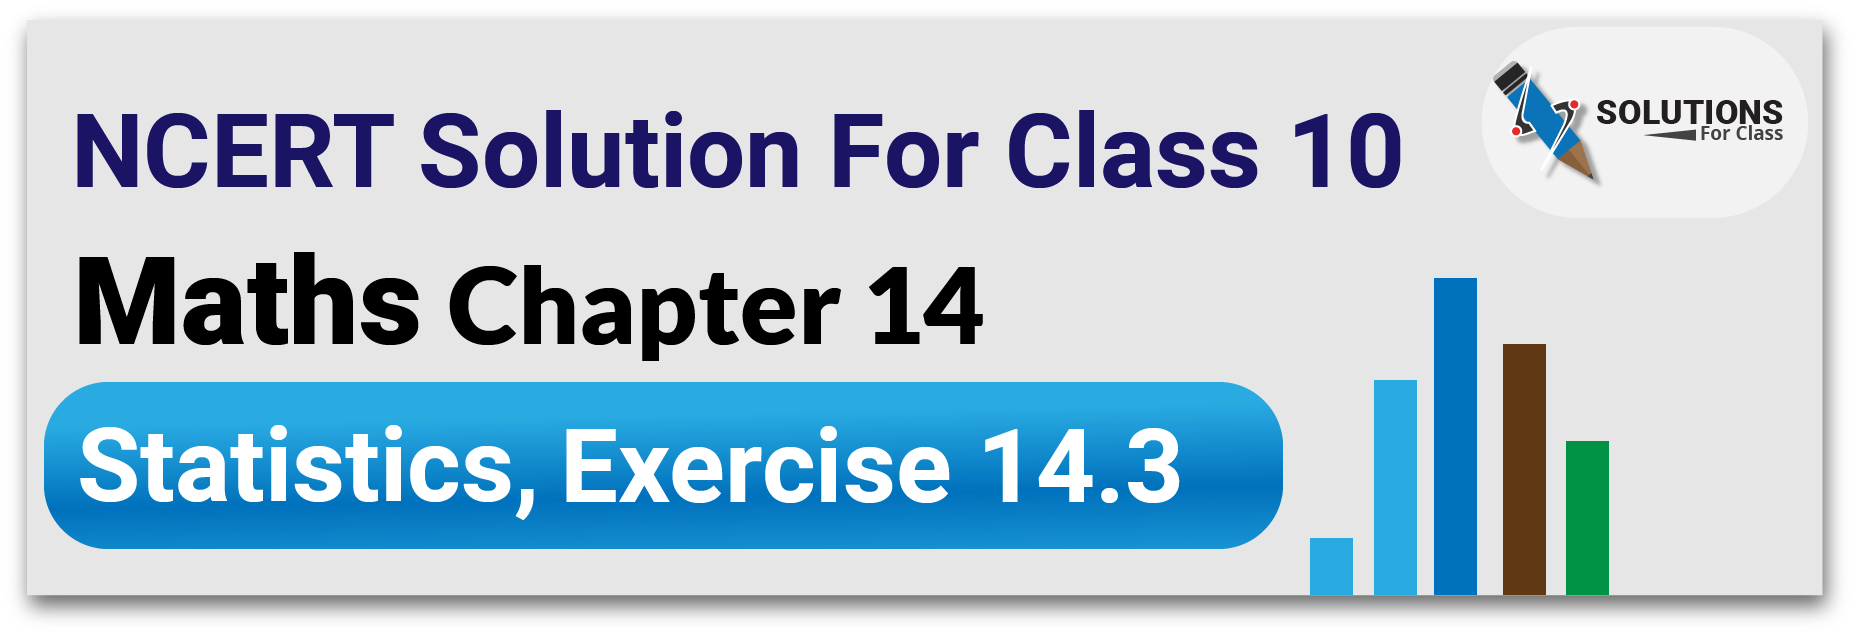 NCERT Solutions For Class 10, Maths, Chapter 14, Statistics, Exercise 14.3